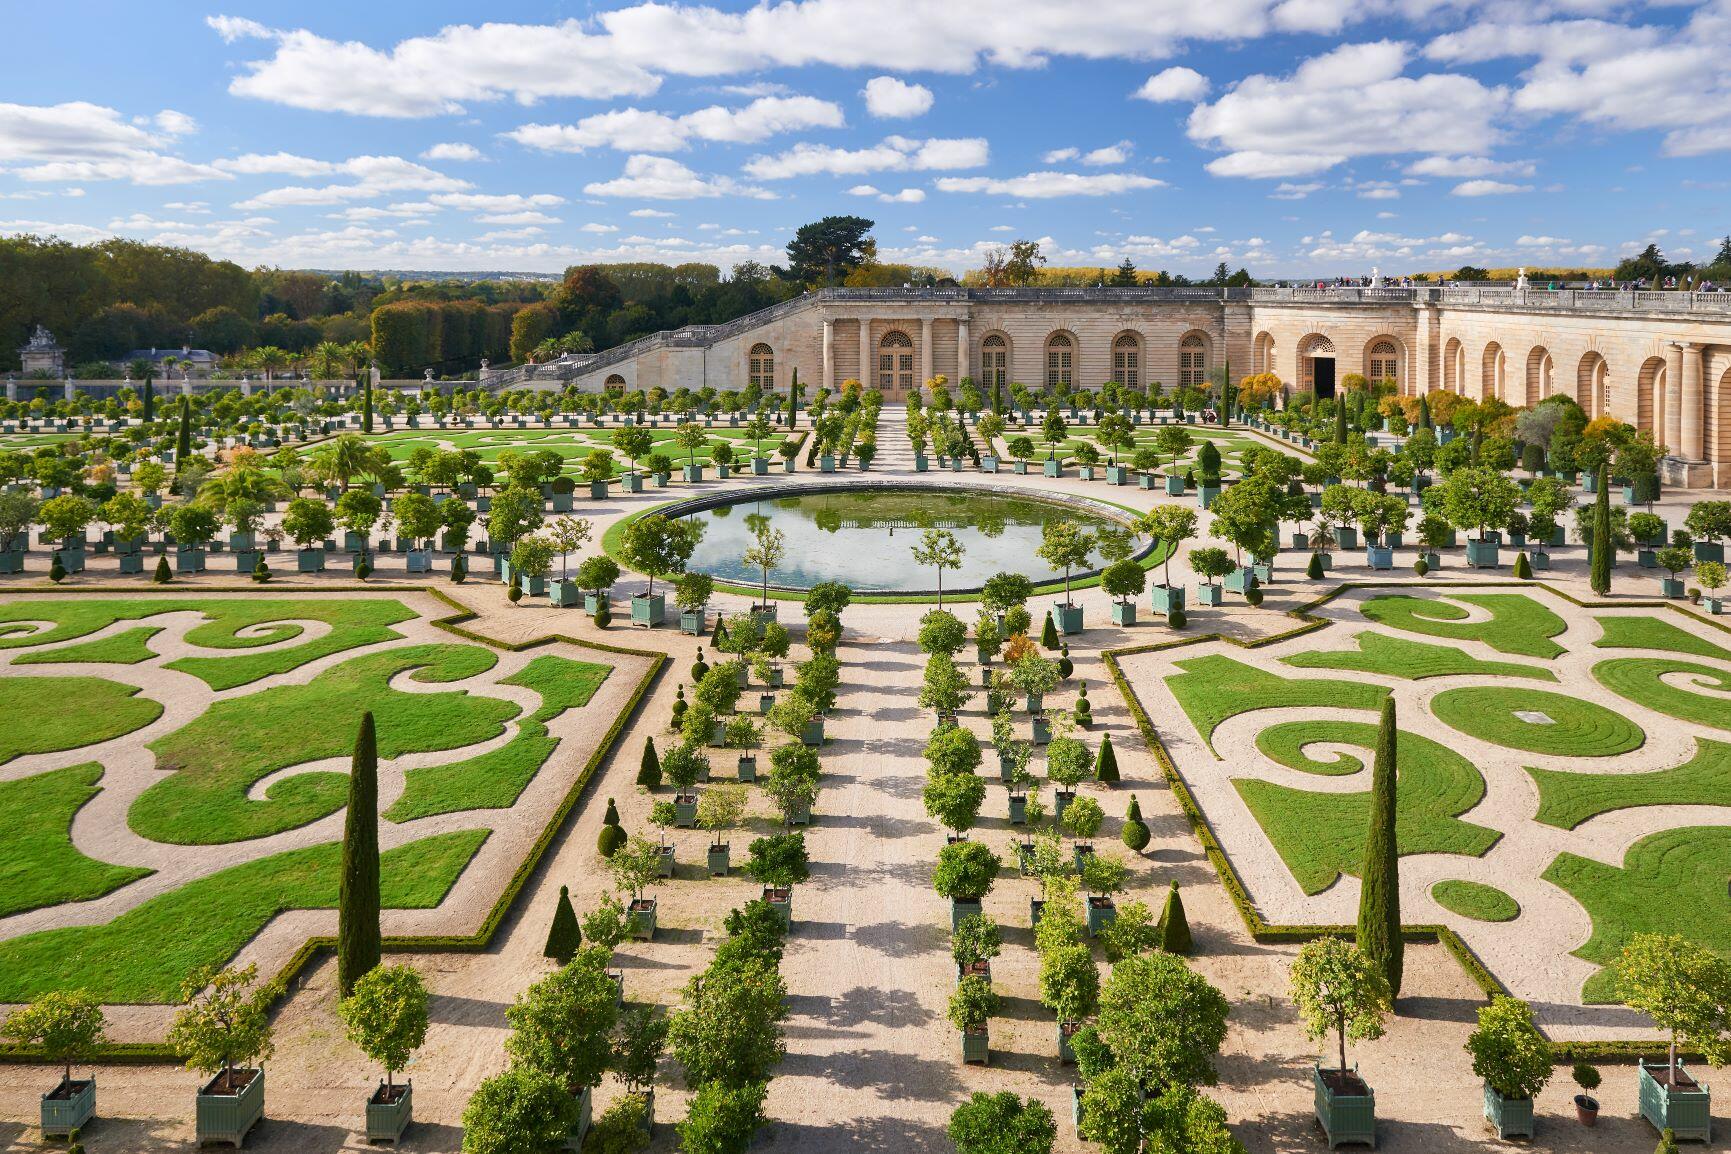 Know before you go: Palace of Versailles | The Paris Pass®